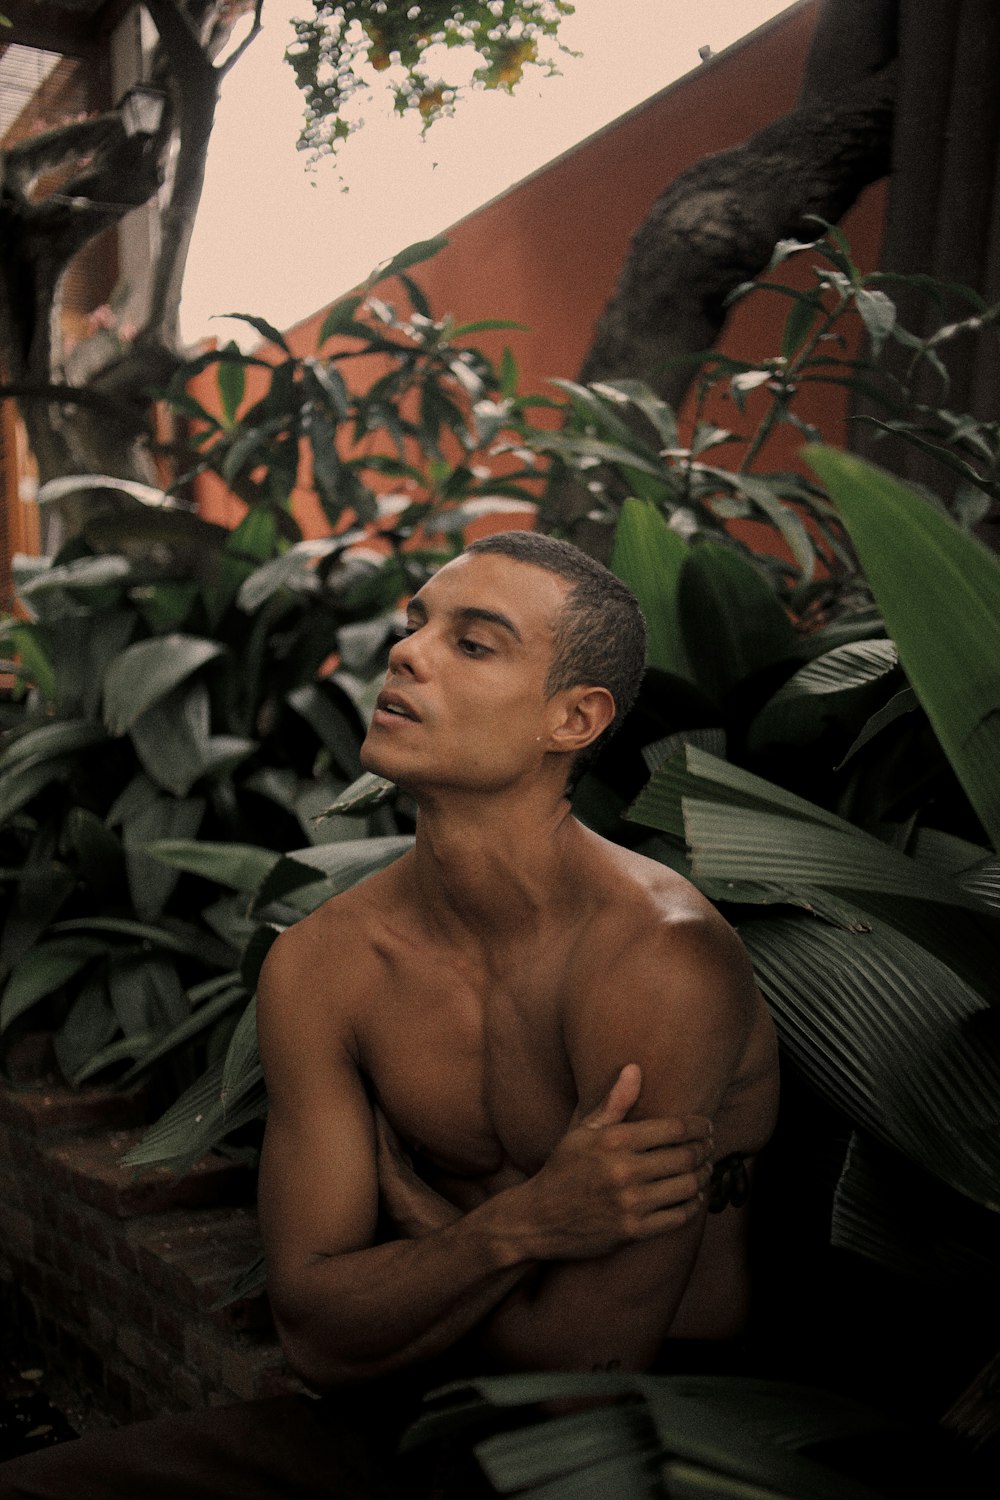 a shirtless man sitting in front of some plants